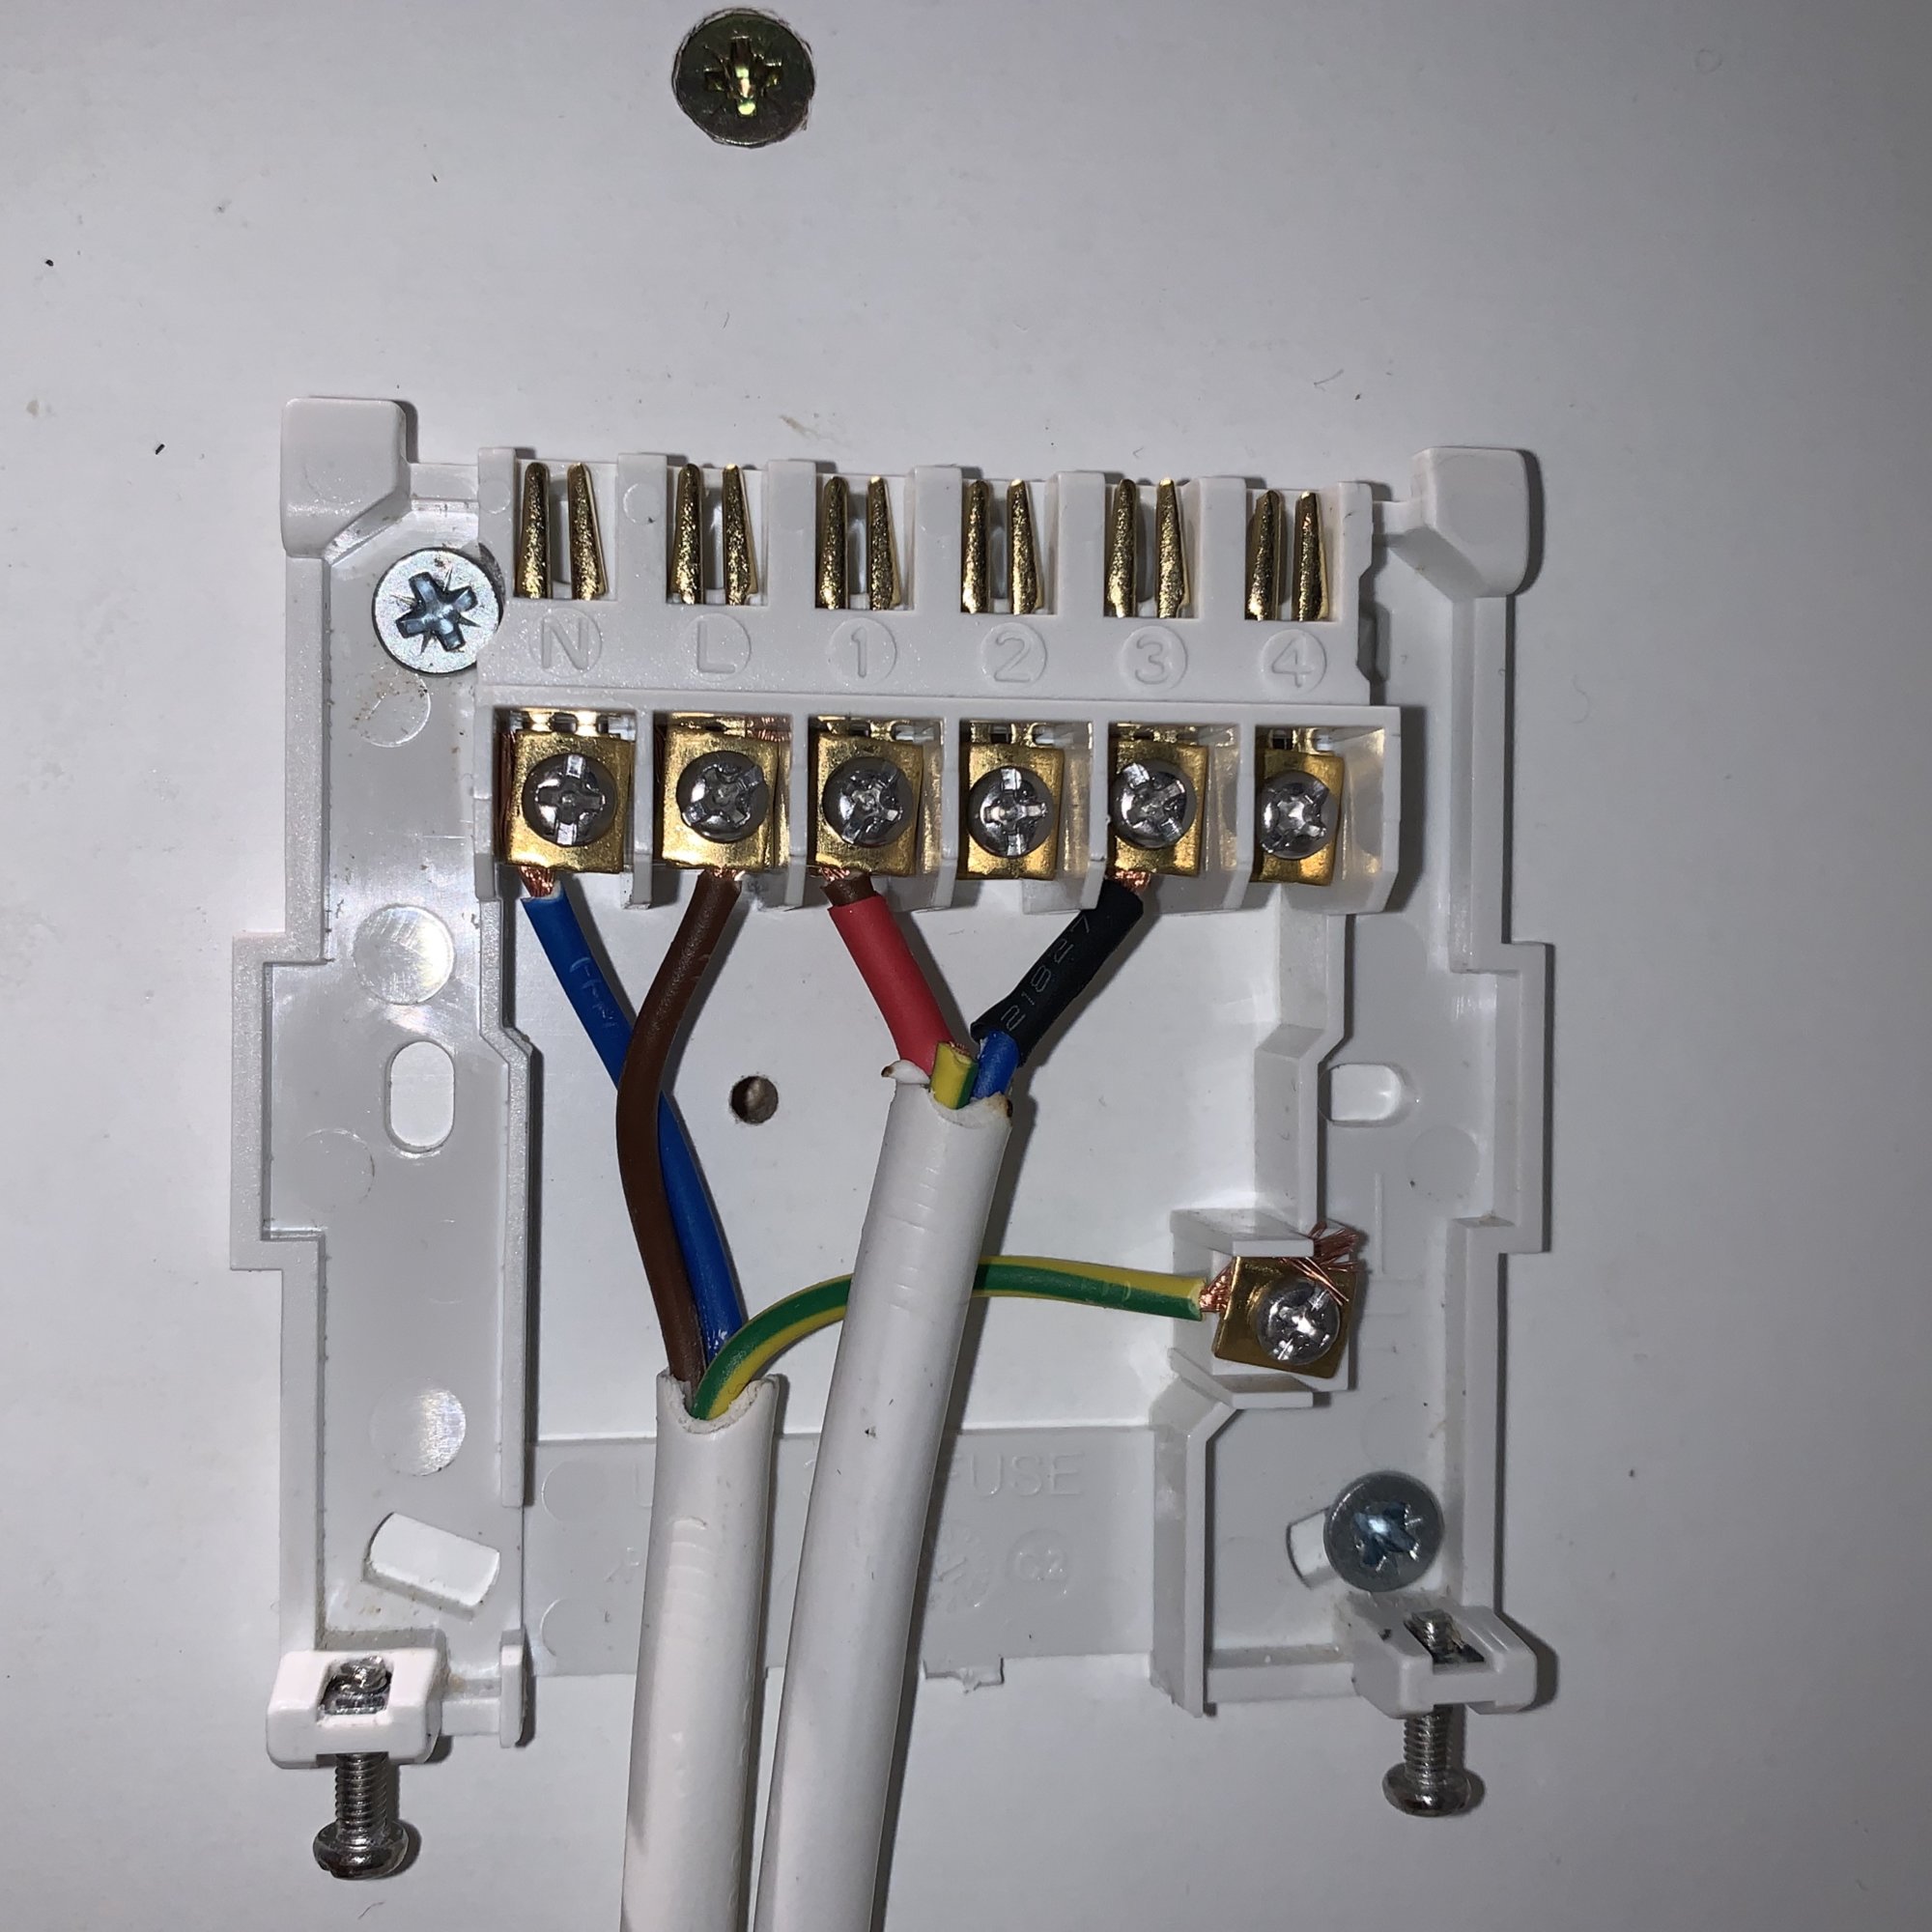 Hive Receiver wiring from Ideal Logic+ Combi boiler